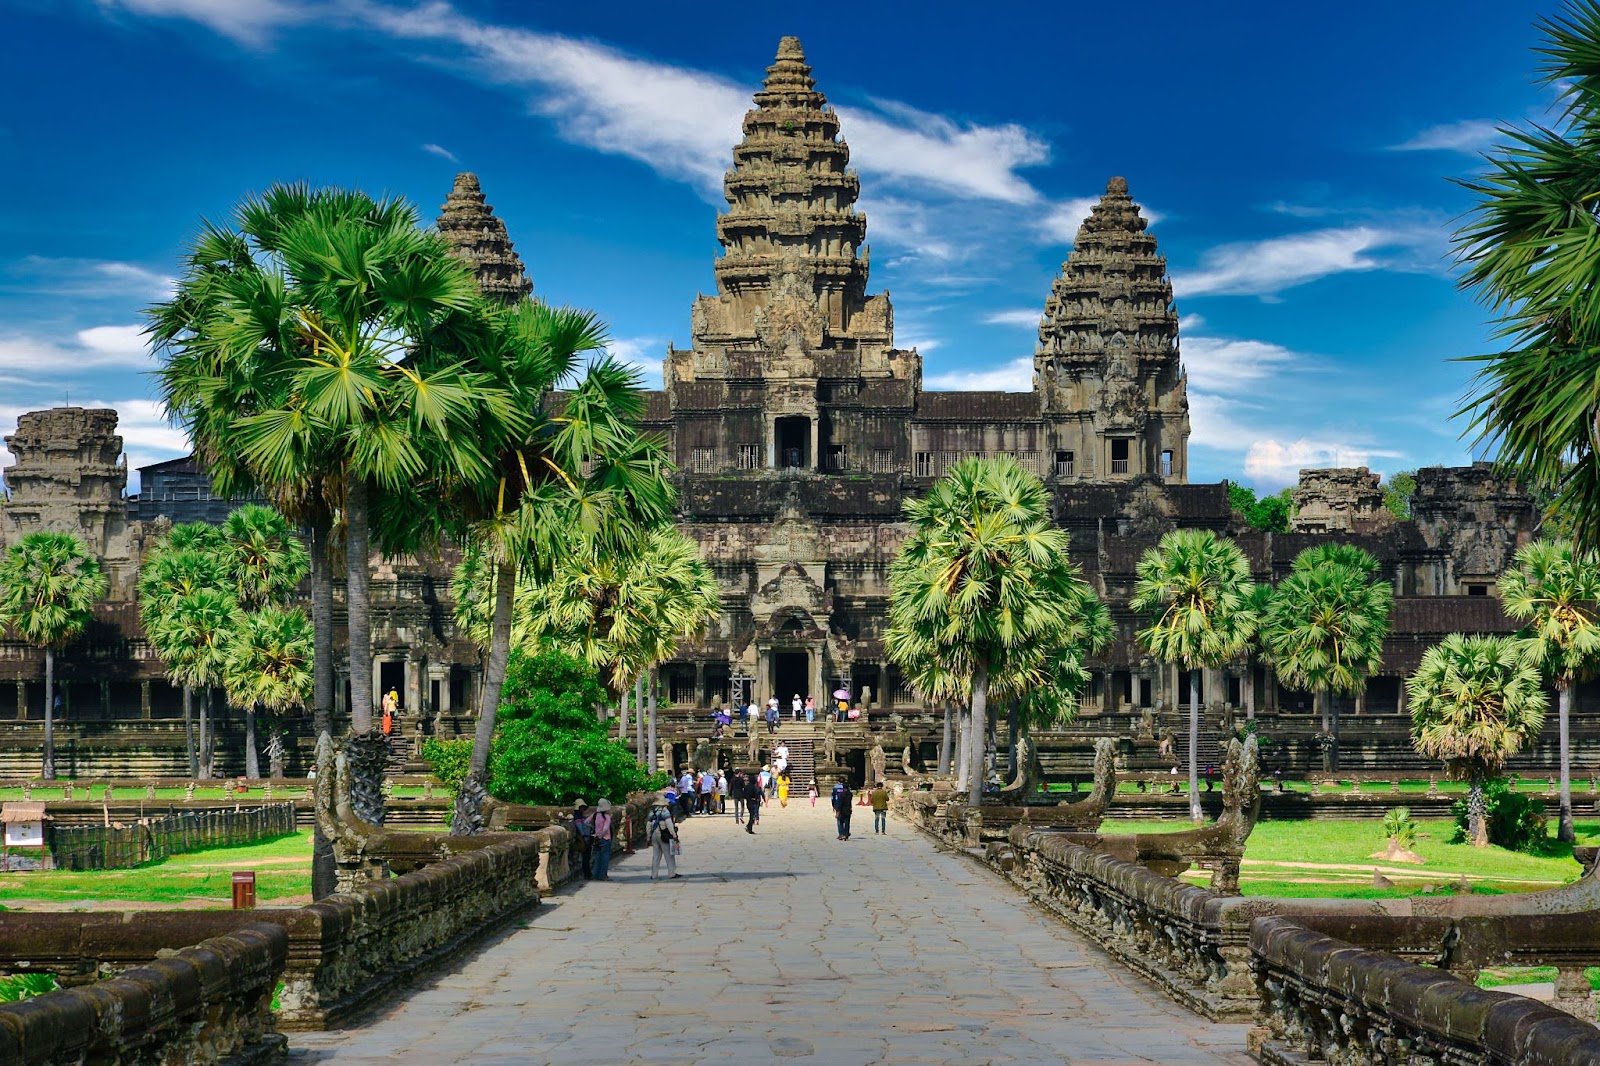 The Angkor Wat, Cambodia - 23 Top Sights to See Before You Die